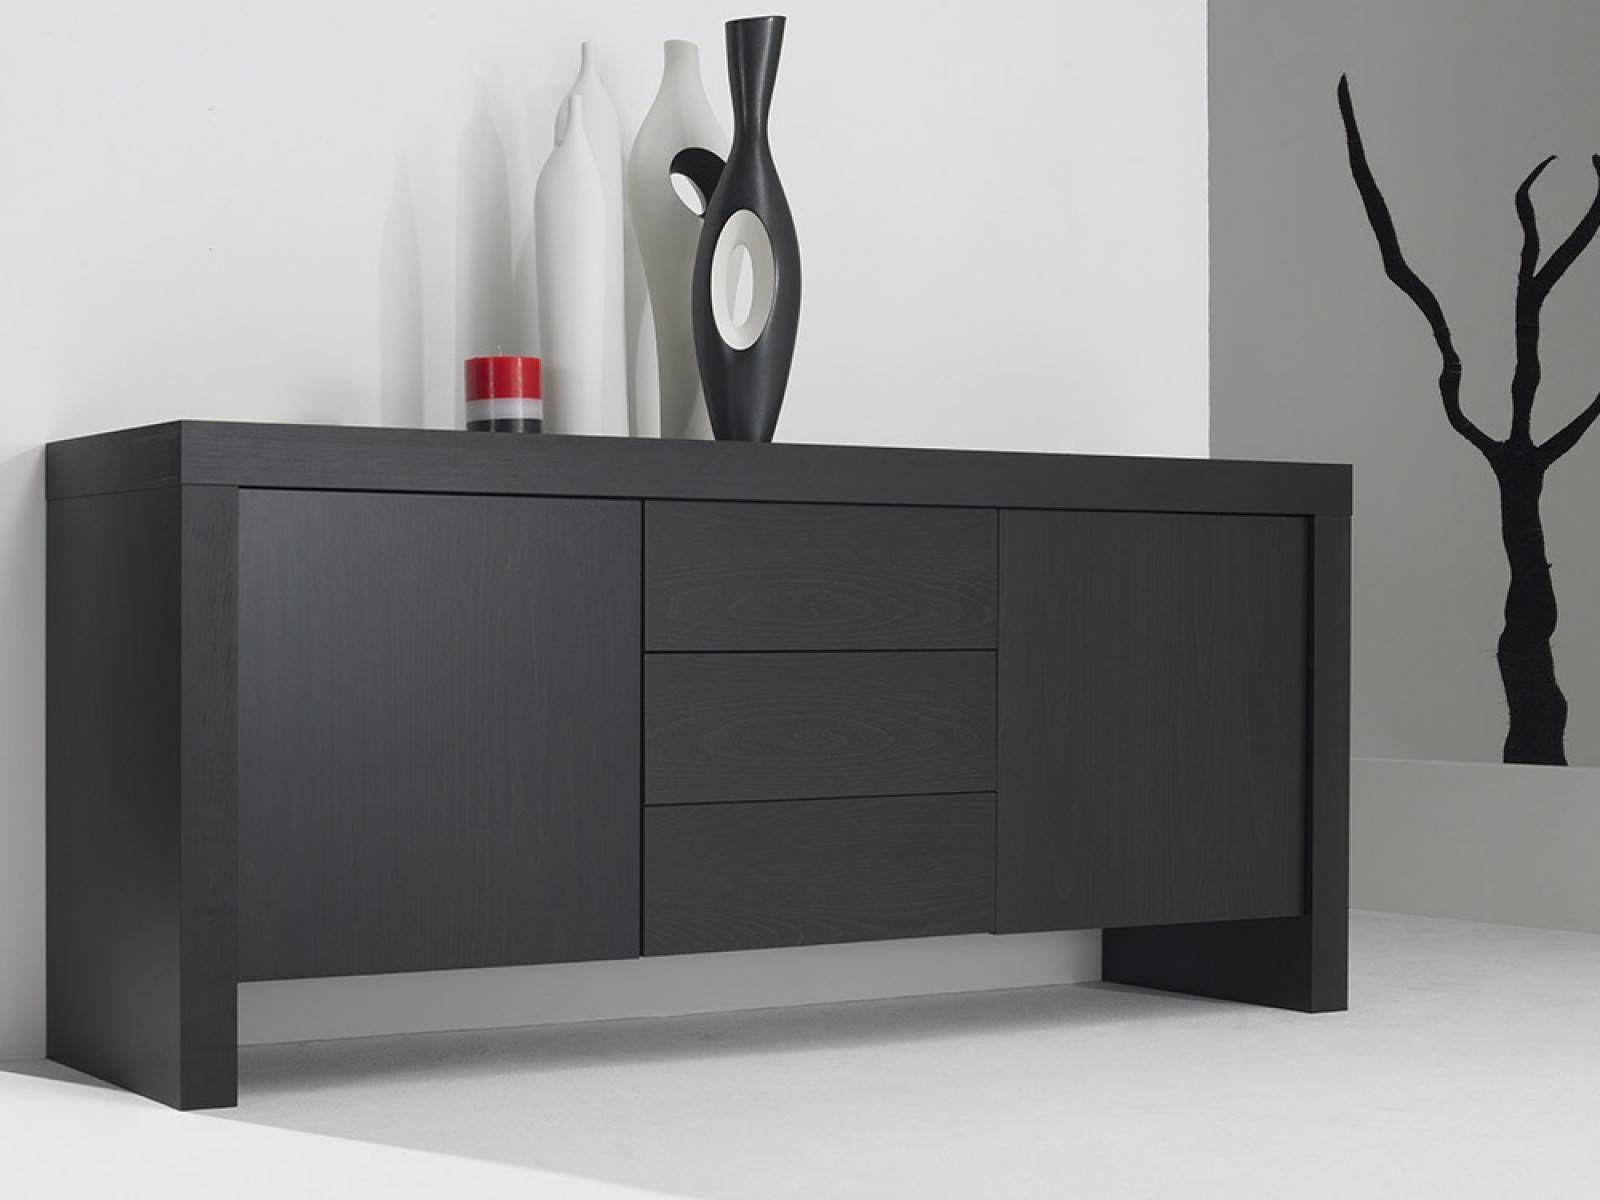 Tremendous Modern Dark Grey Sideboard Design With Two Cabinet For Dark Sideboards (View 11 of 20)